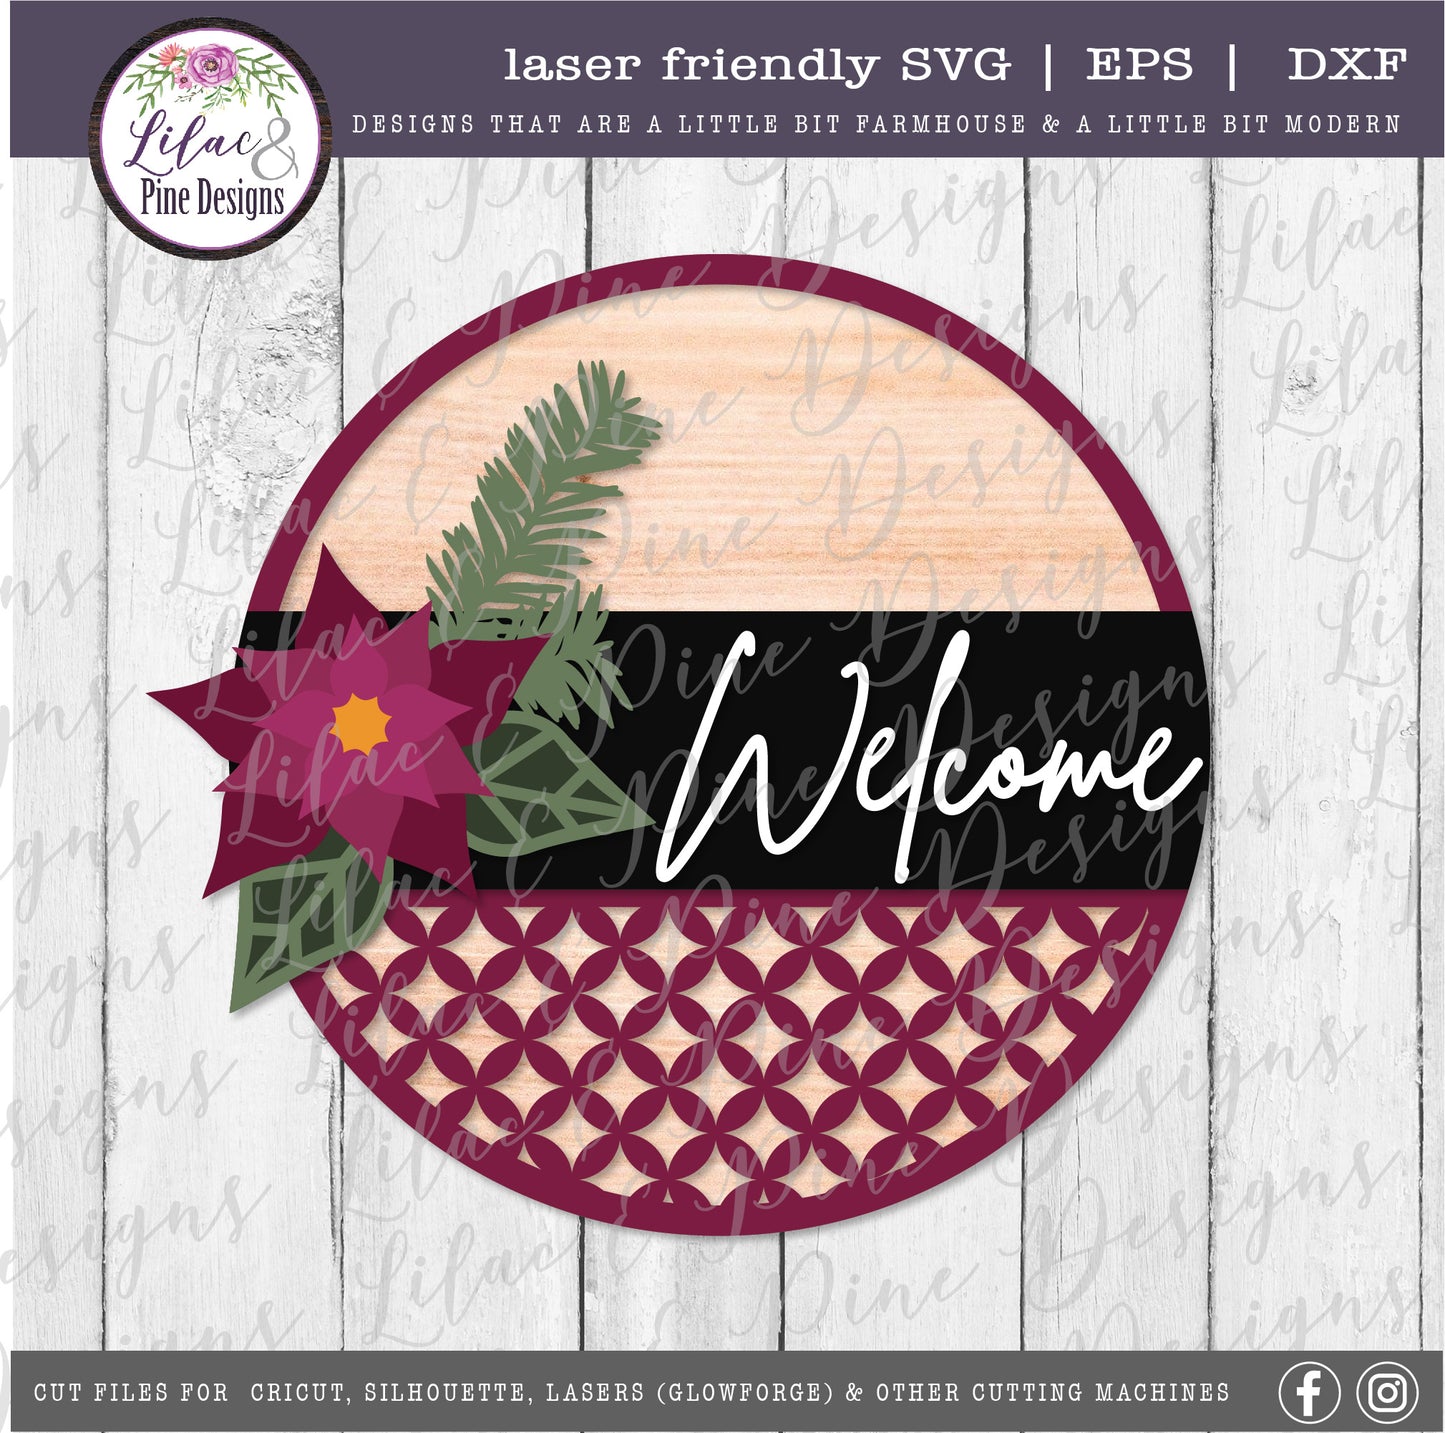 Christmas Welcome sign SVG, Poinsettia SVG, Christmas Floral SVG, Holiday Floral sign SVG, Elegant Christmas sign, laser cut file, Glowforge SVG